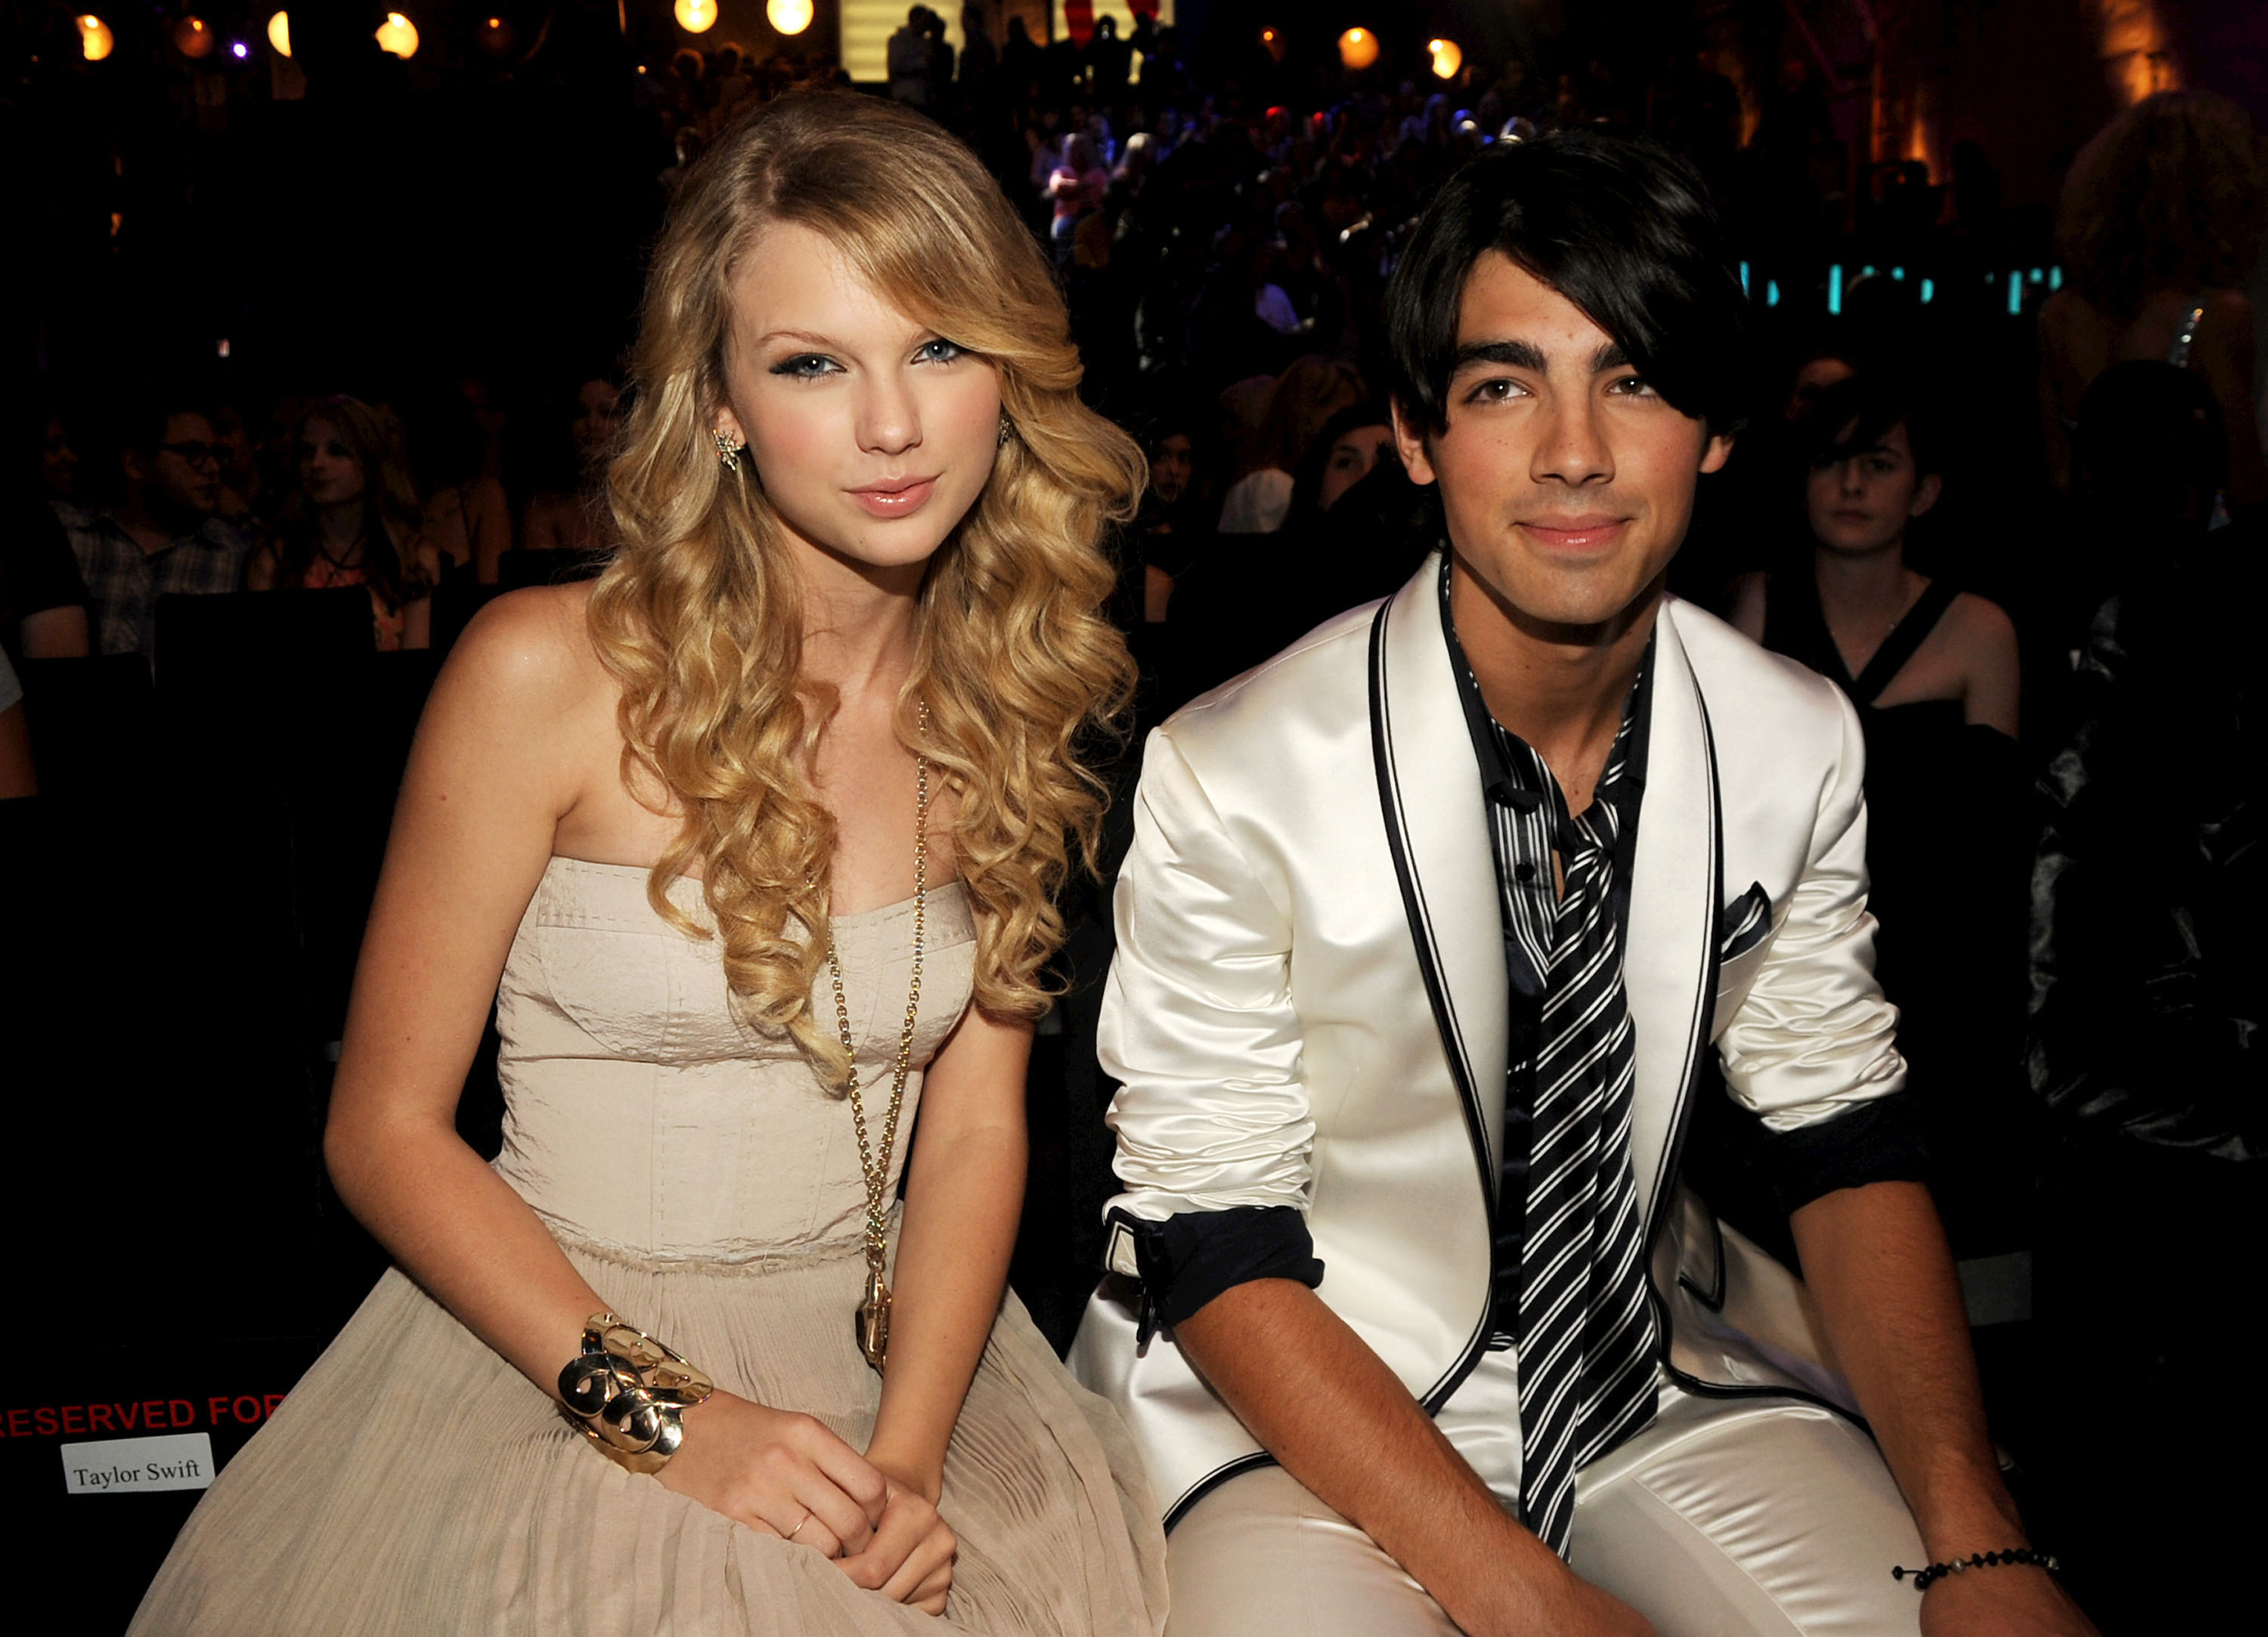 A young Taylor Swift sits next to Joe Jonas - who is wearing a white satin suit - at an awards show